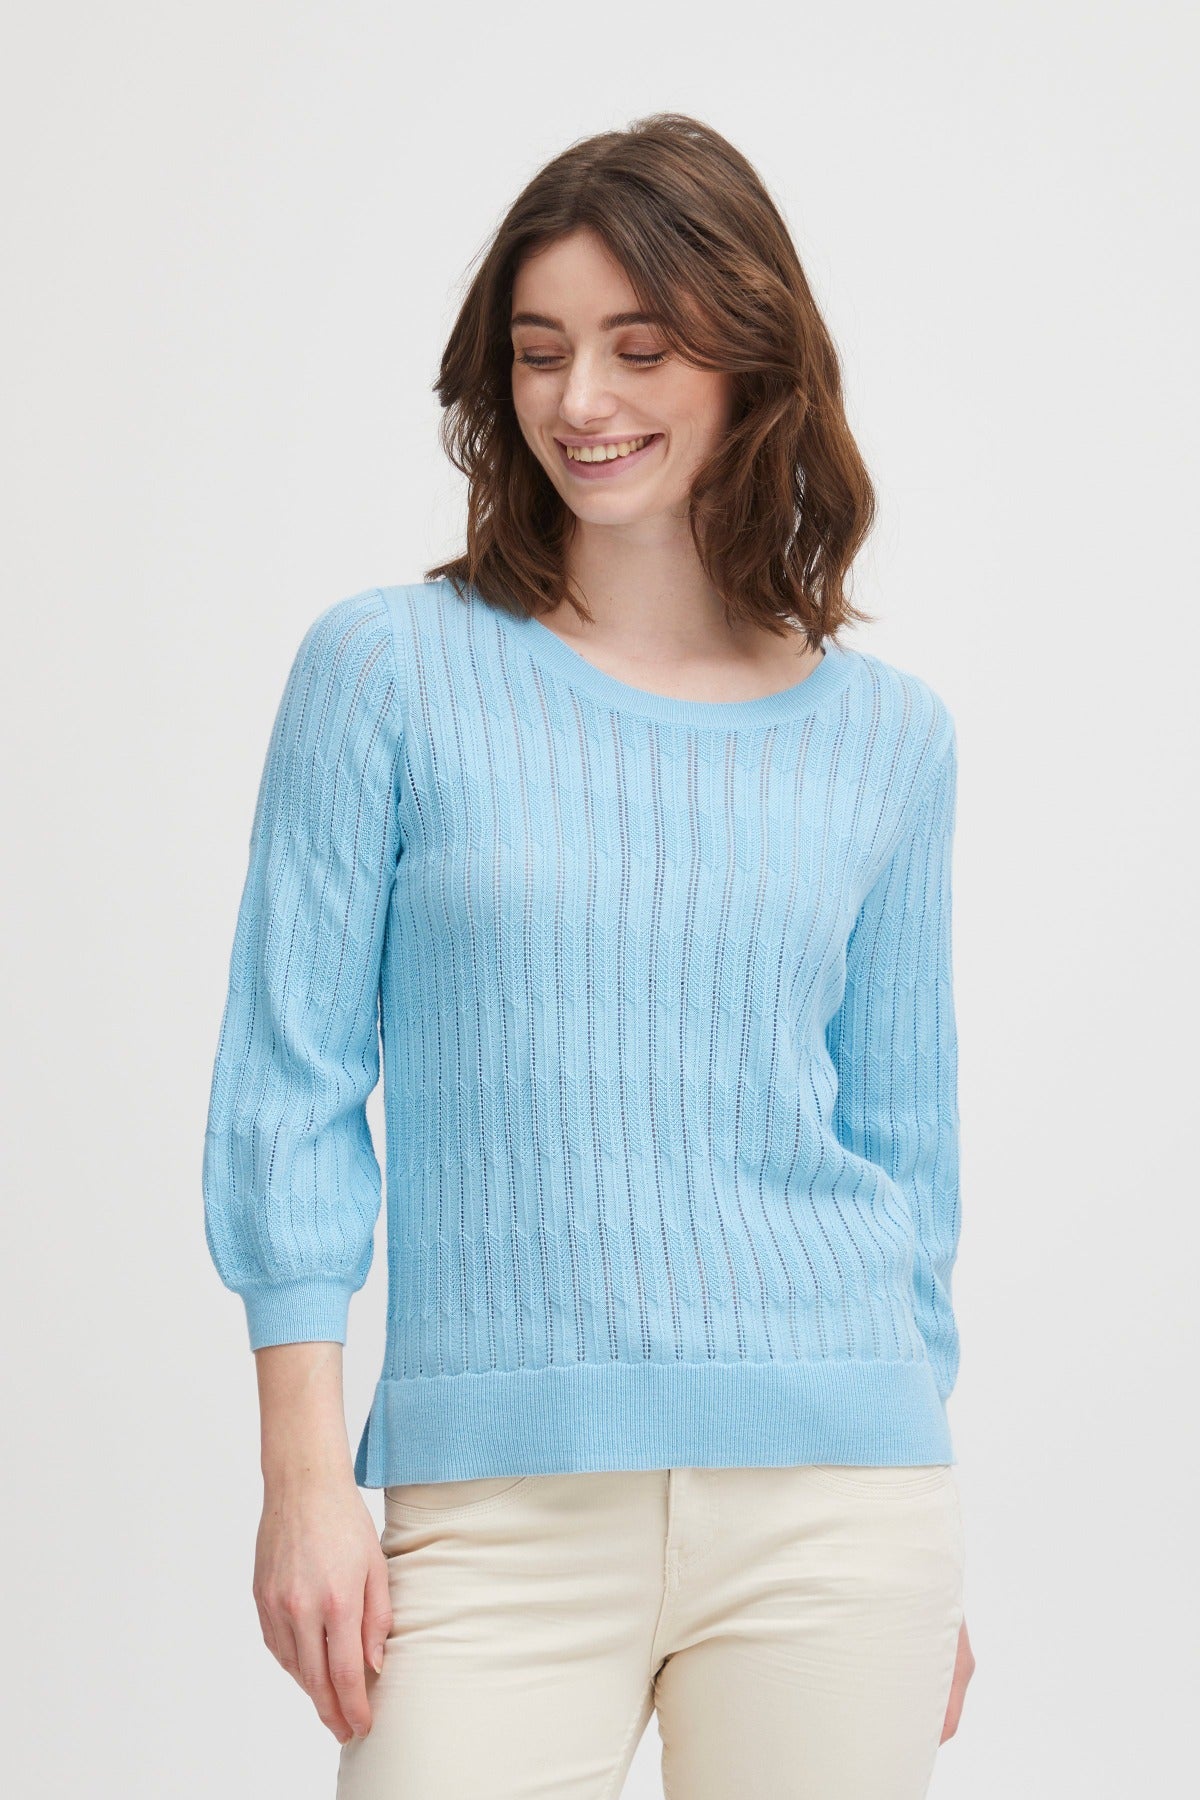 The Sunshine Knitted Pullover